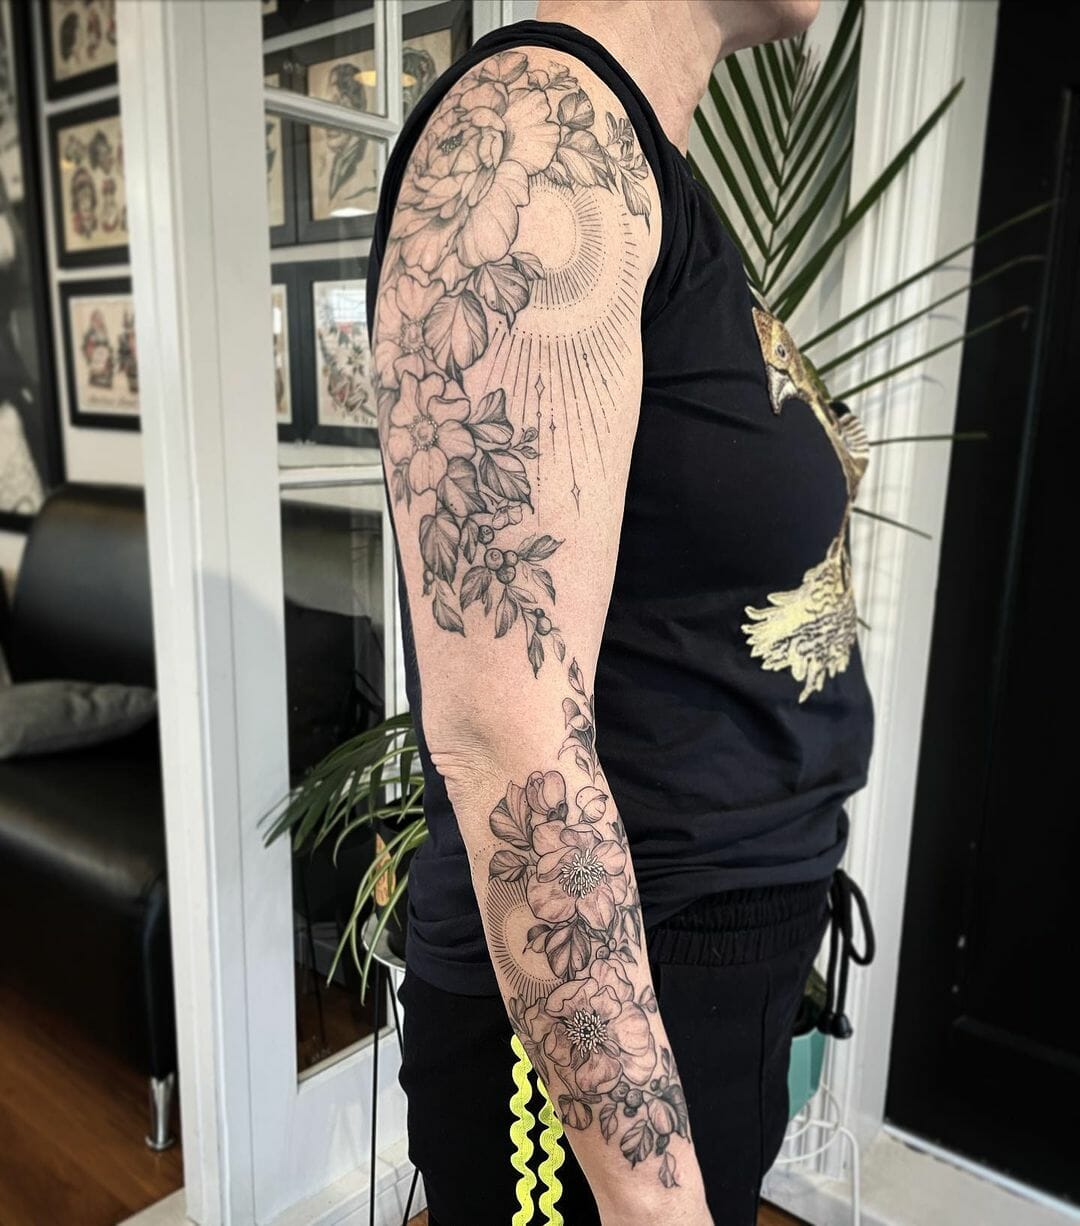 66 Amazing Floral Sleeve Tattoo Ideas To Inspire You In 2023! - Outsons